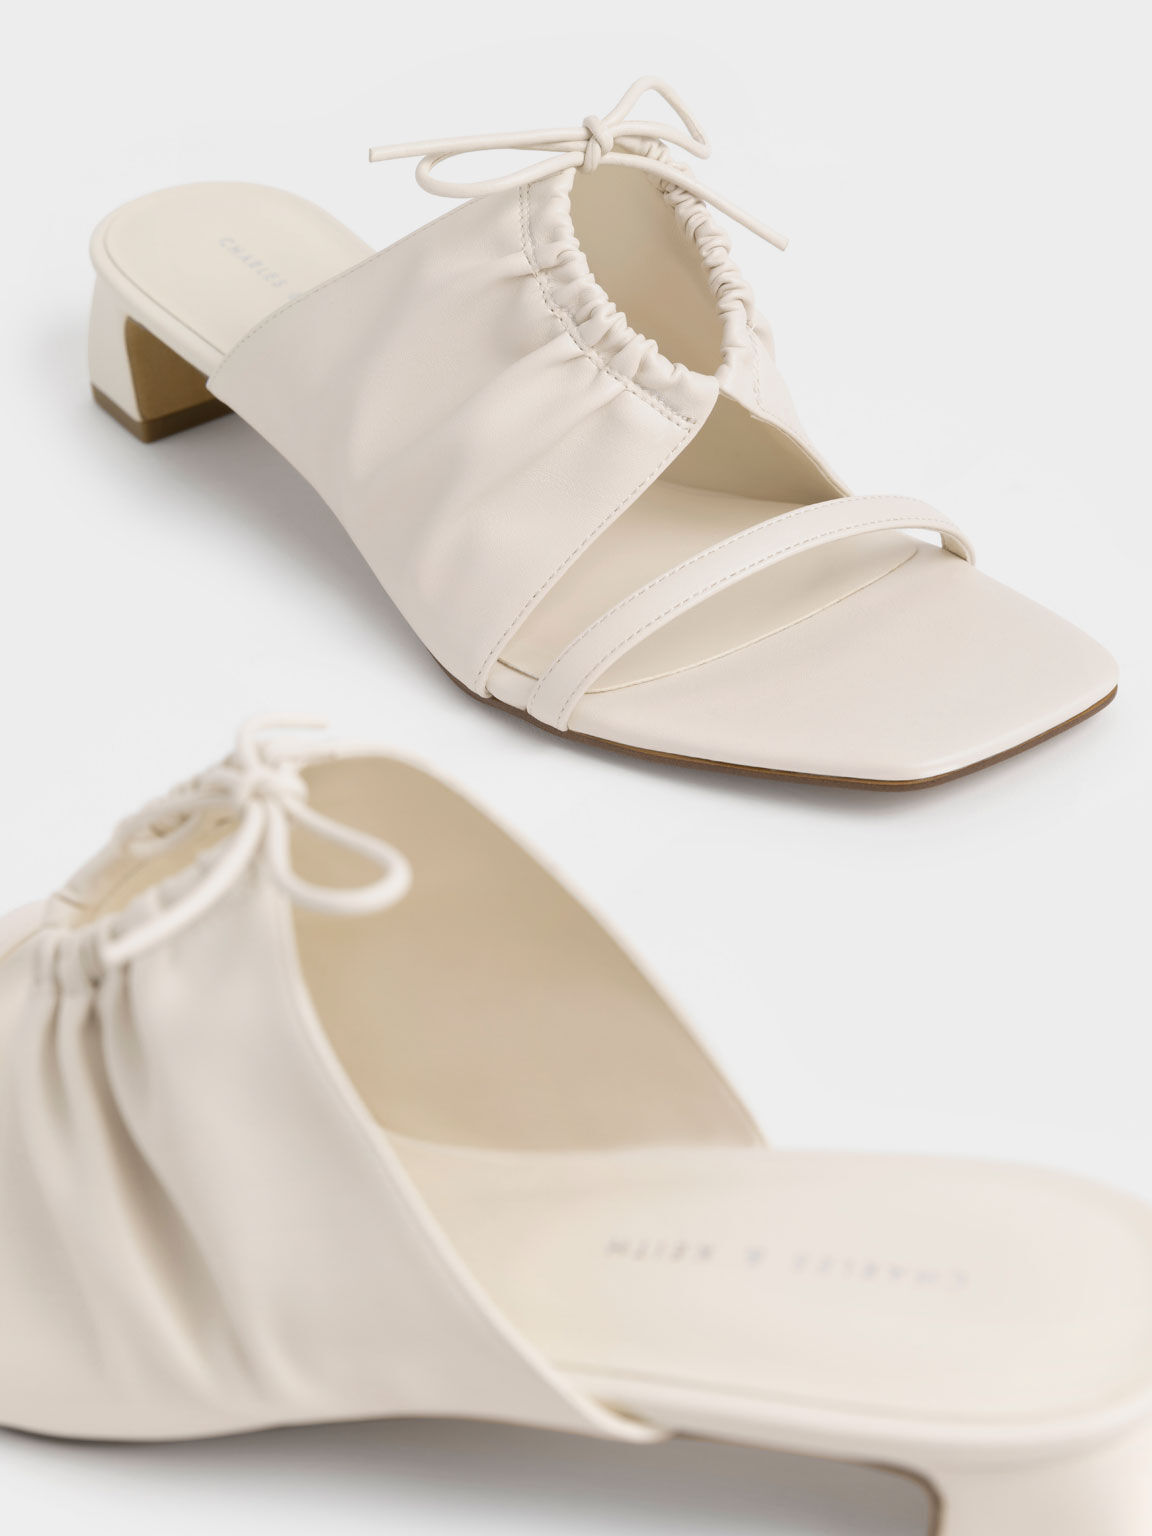 Bow-Tie Ruched Heeled Mules, Cream, hi-res